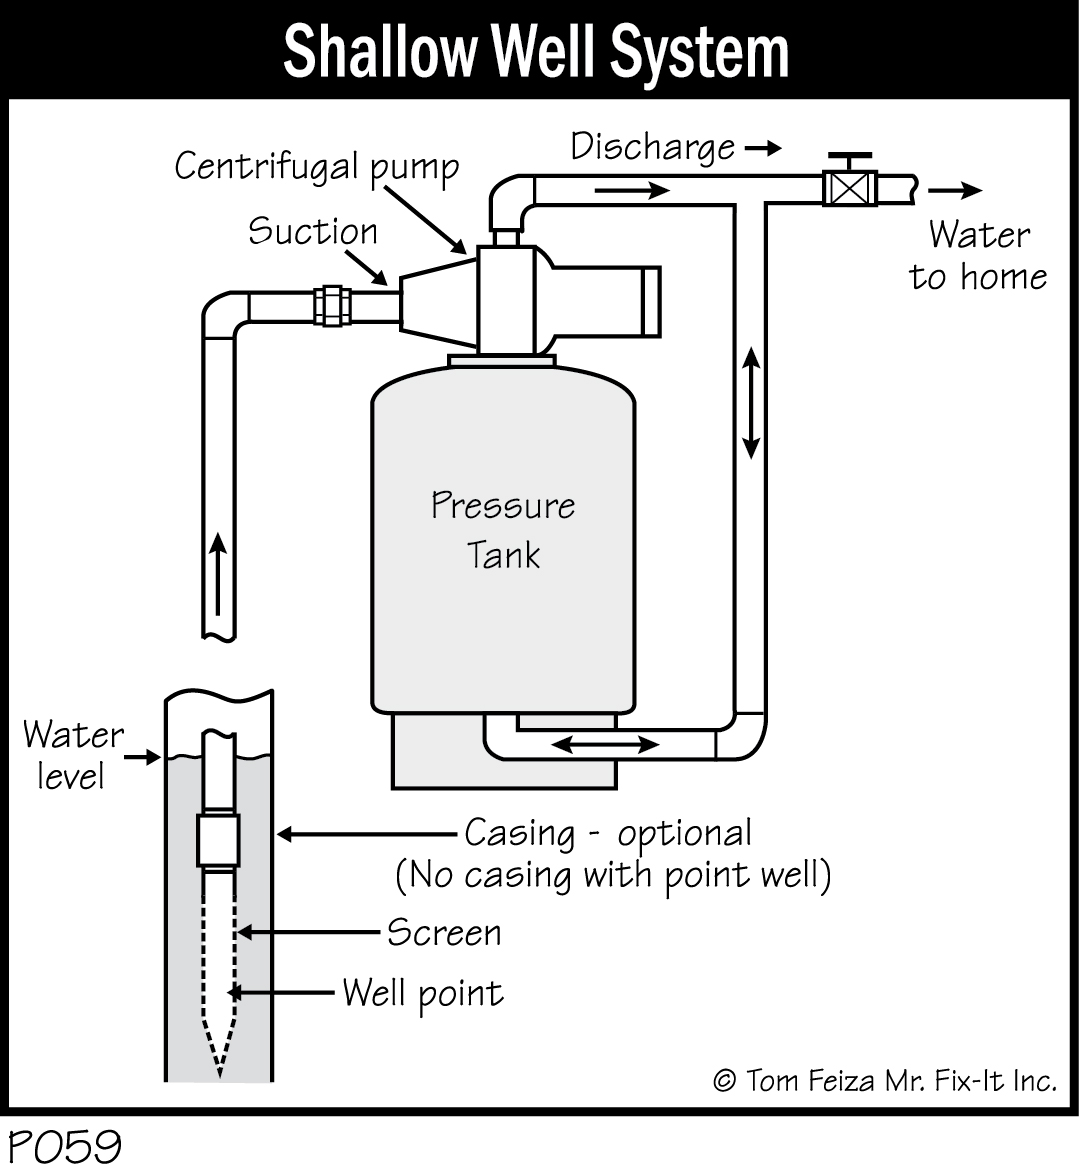 P059 - Shallow Well System